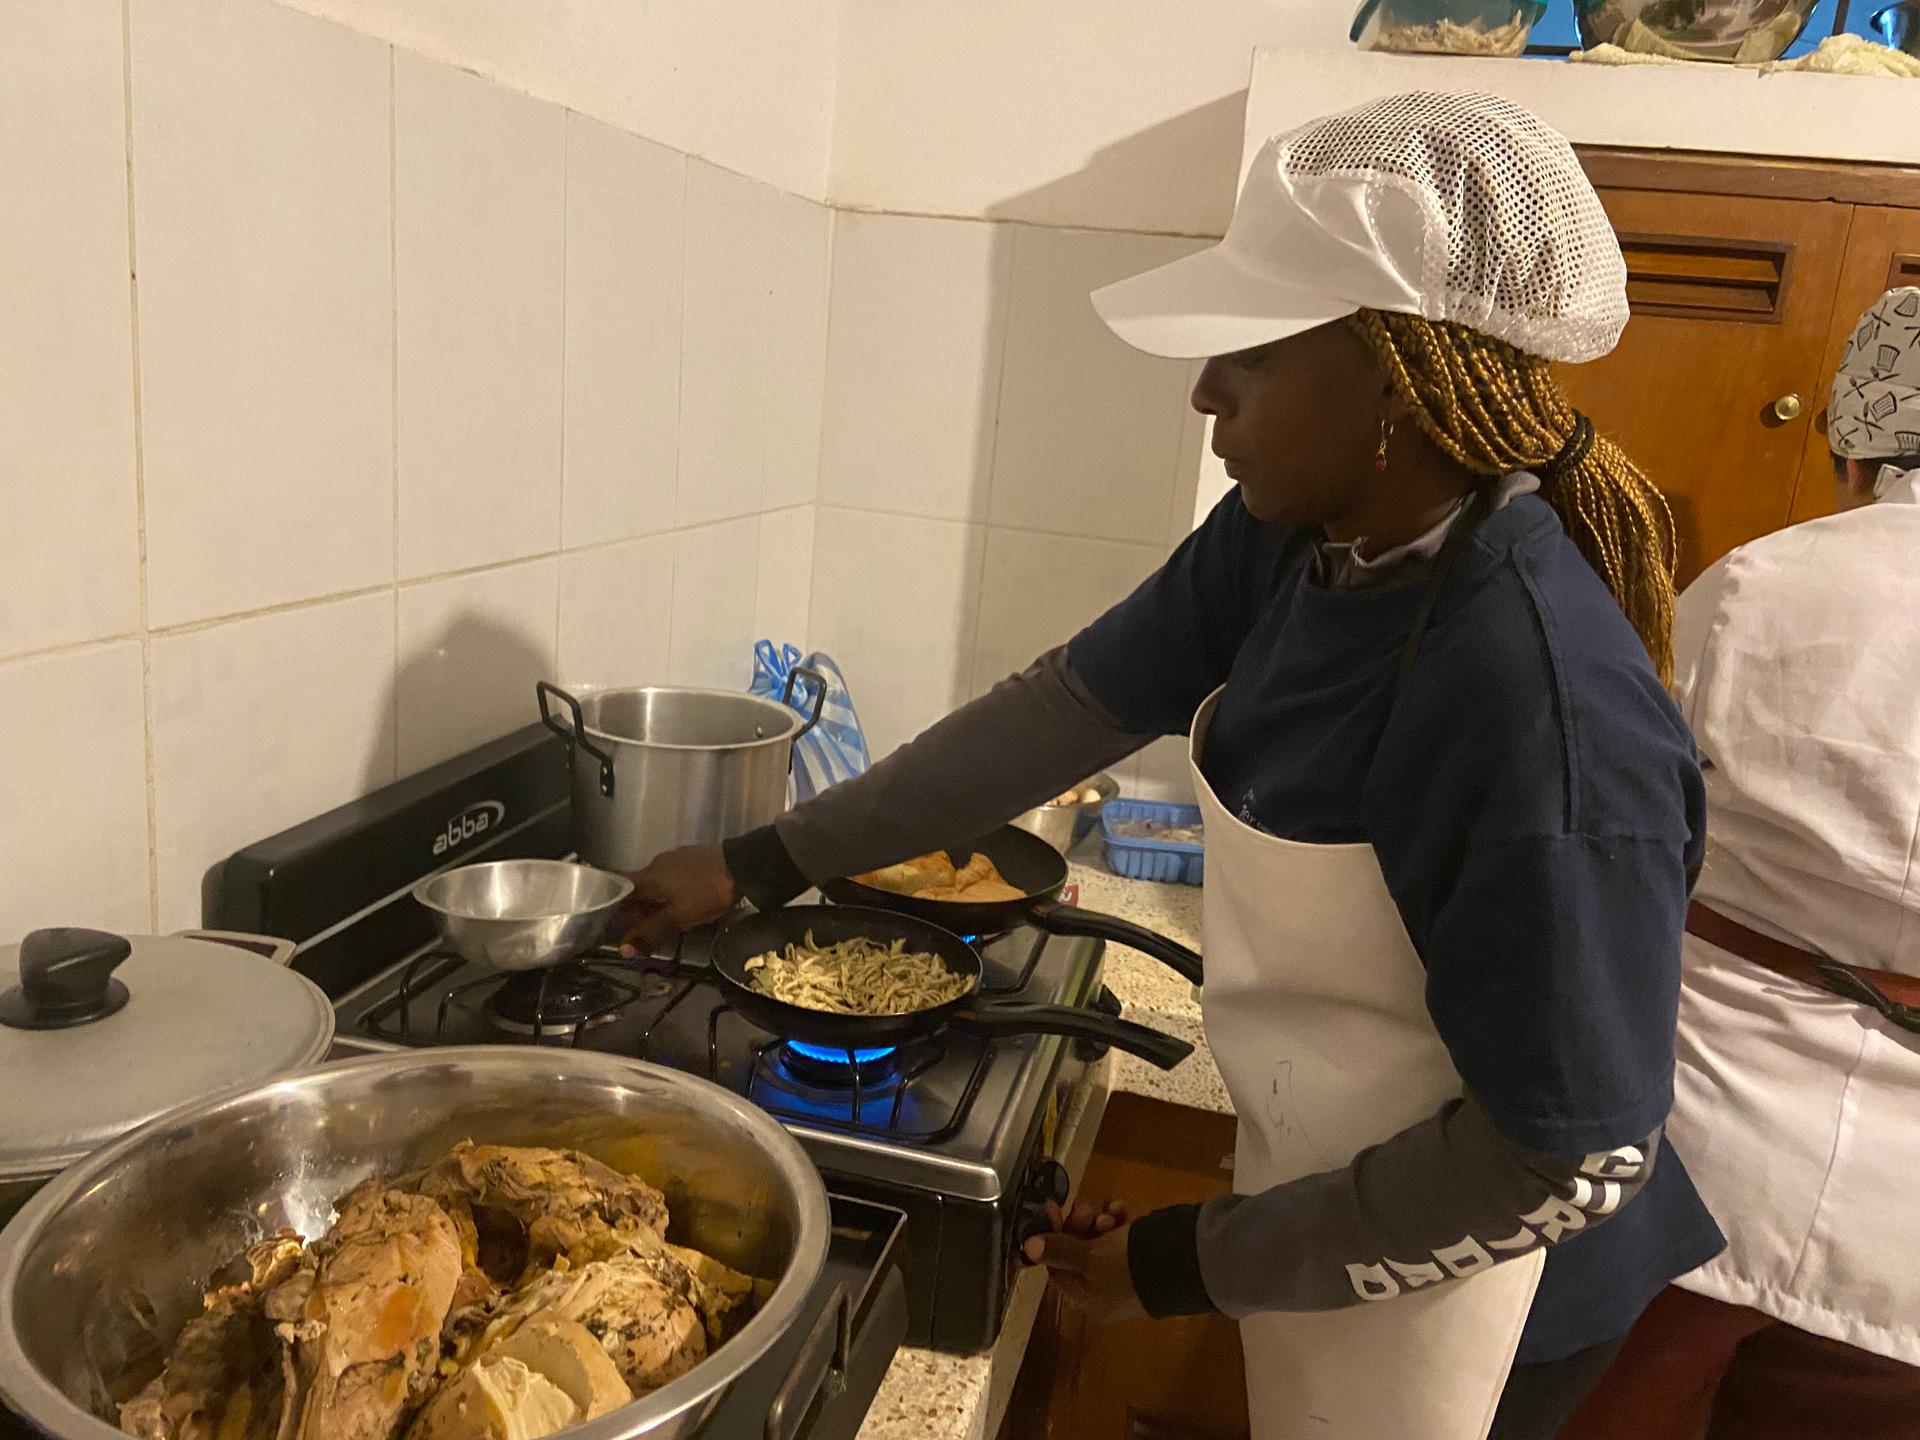 Celeni Charrupí prepares a chicken sandwich and french fries at the start of her shift in the kitchen at La Trocha, sentires de la montaña.